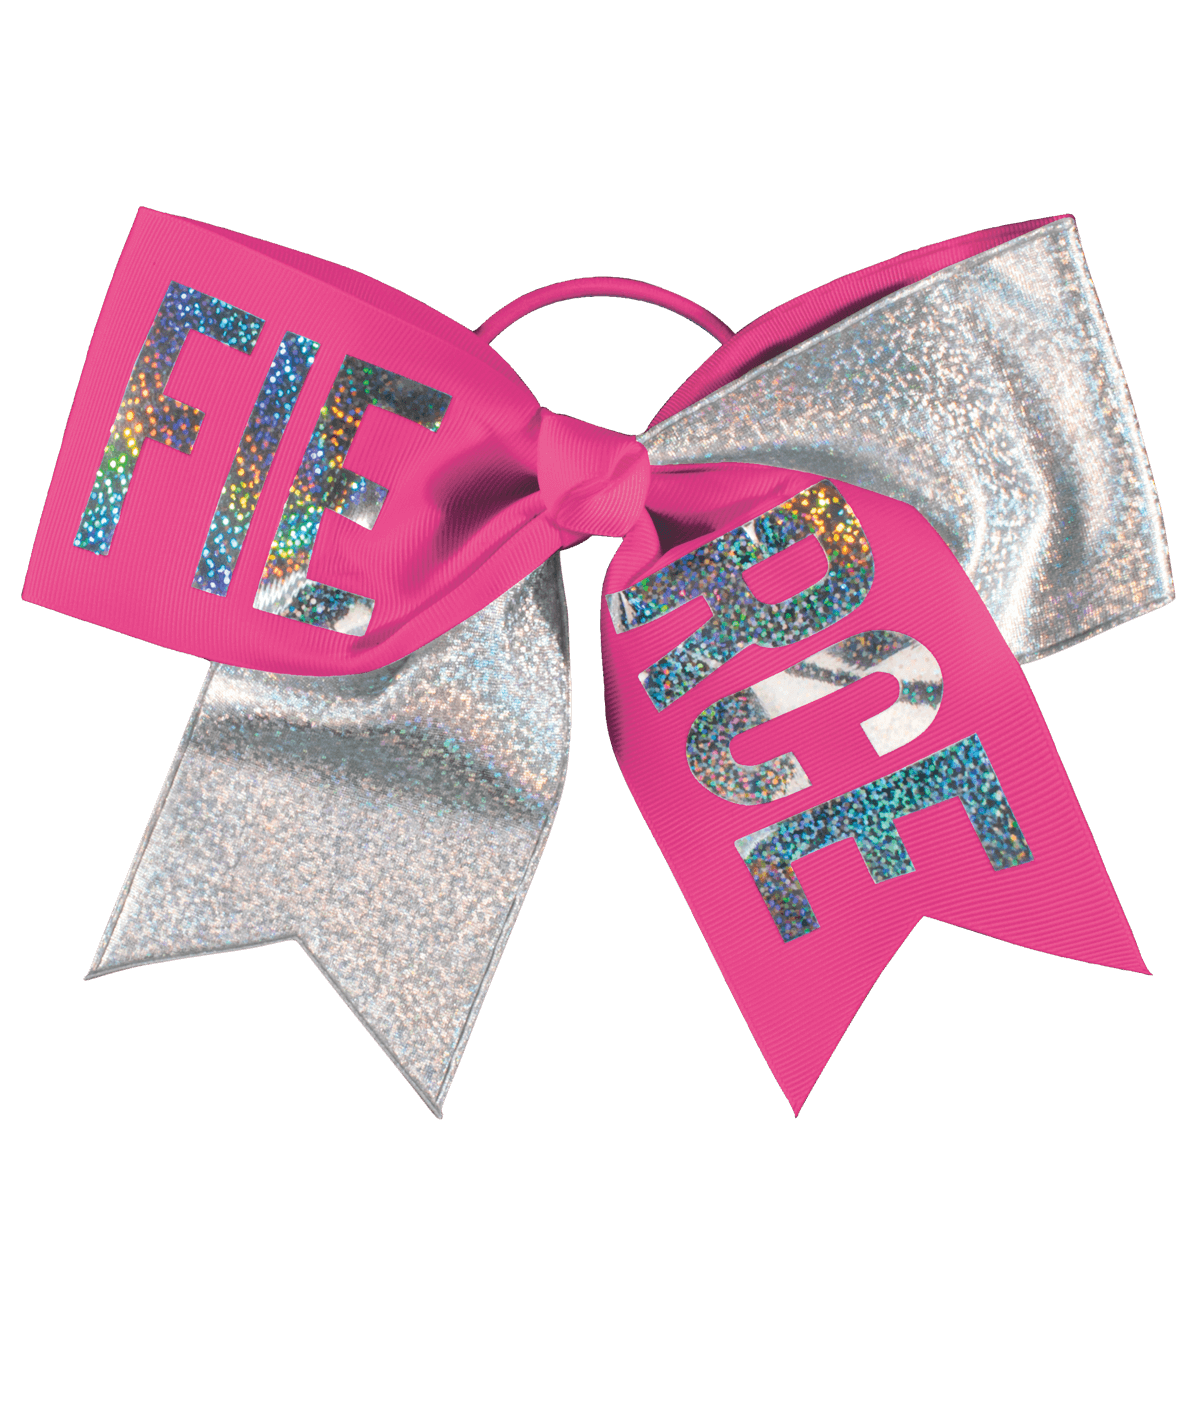 Chasse Fierce Holographic Performance Hair Bow